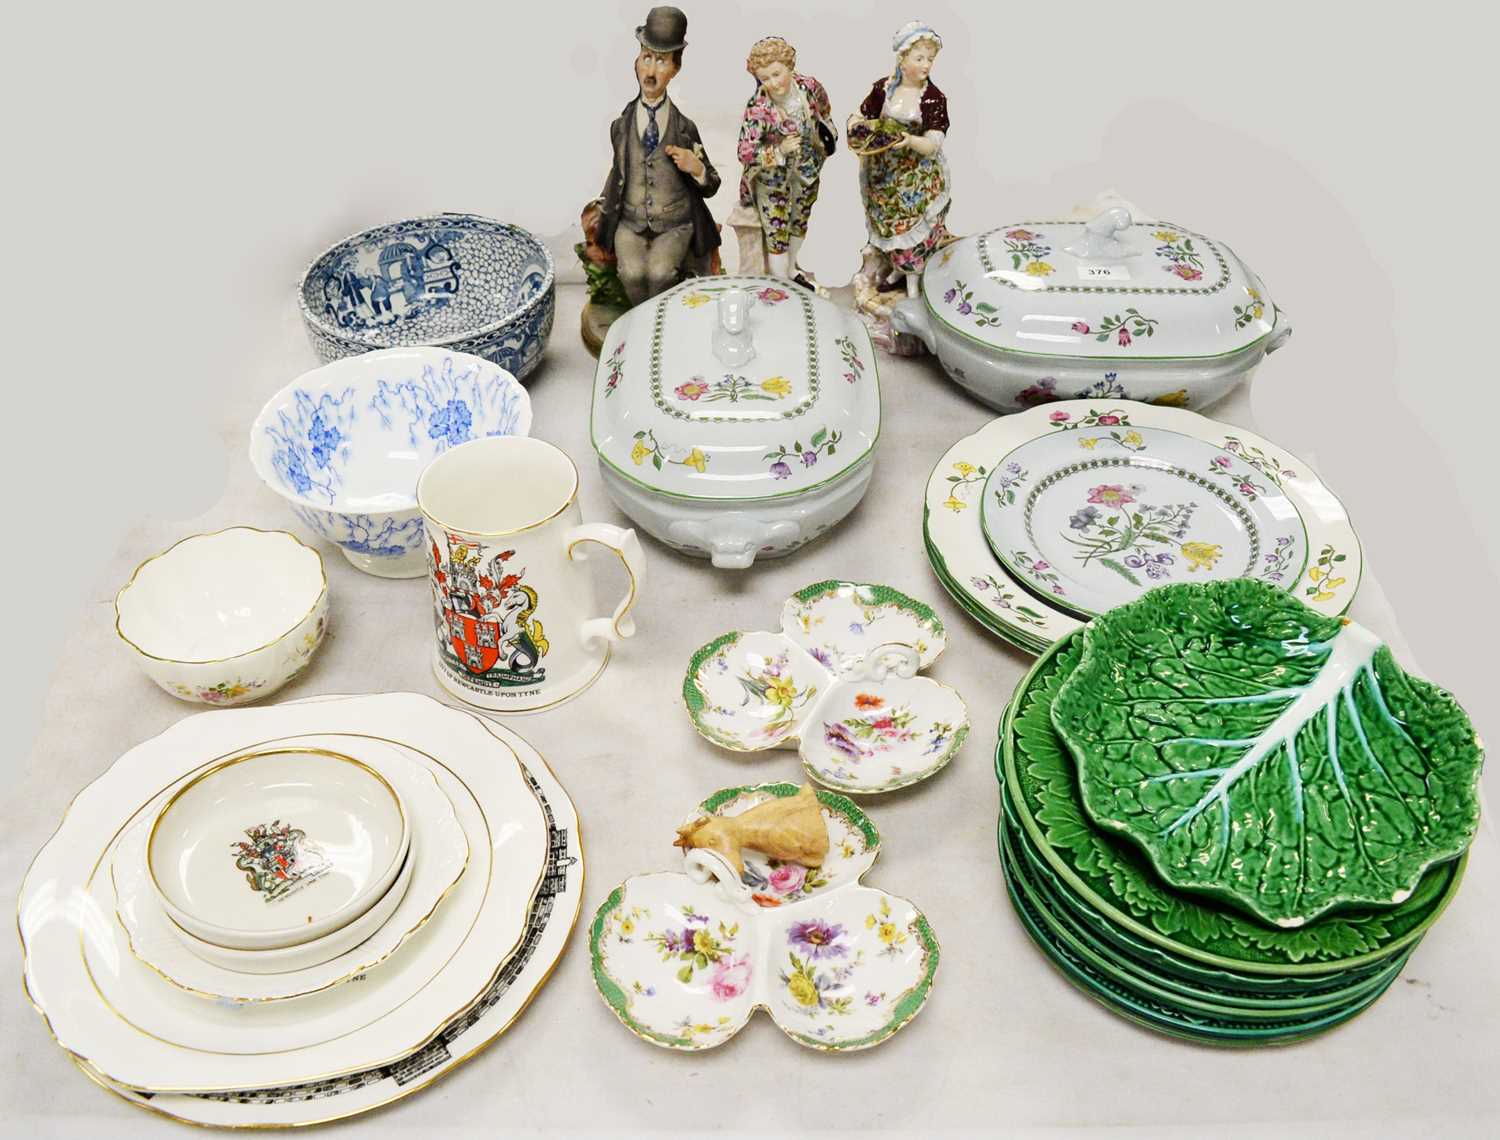 Ceramics including Wedgwood and Royal Doulton